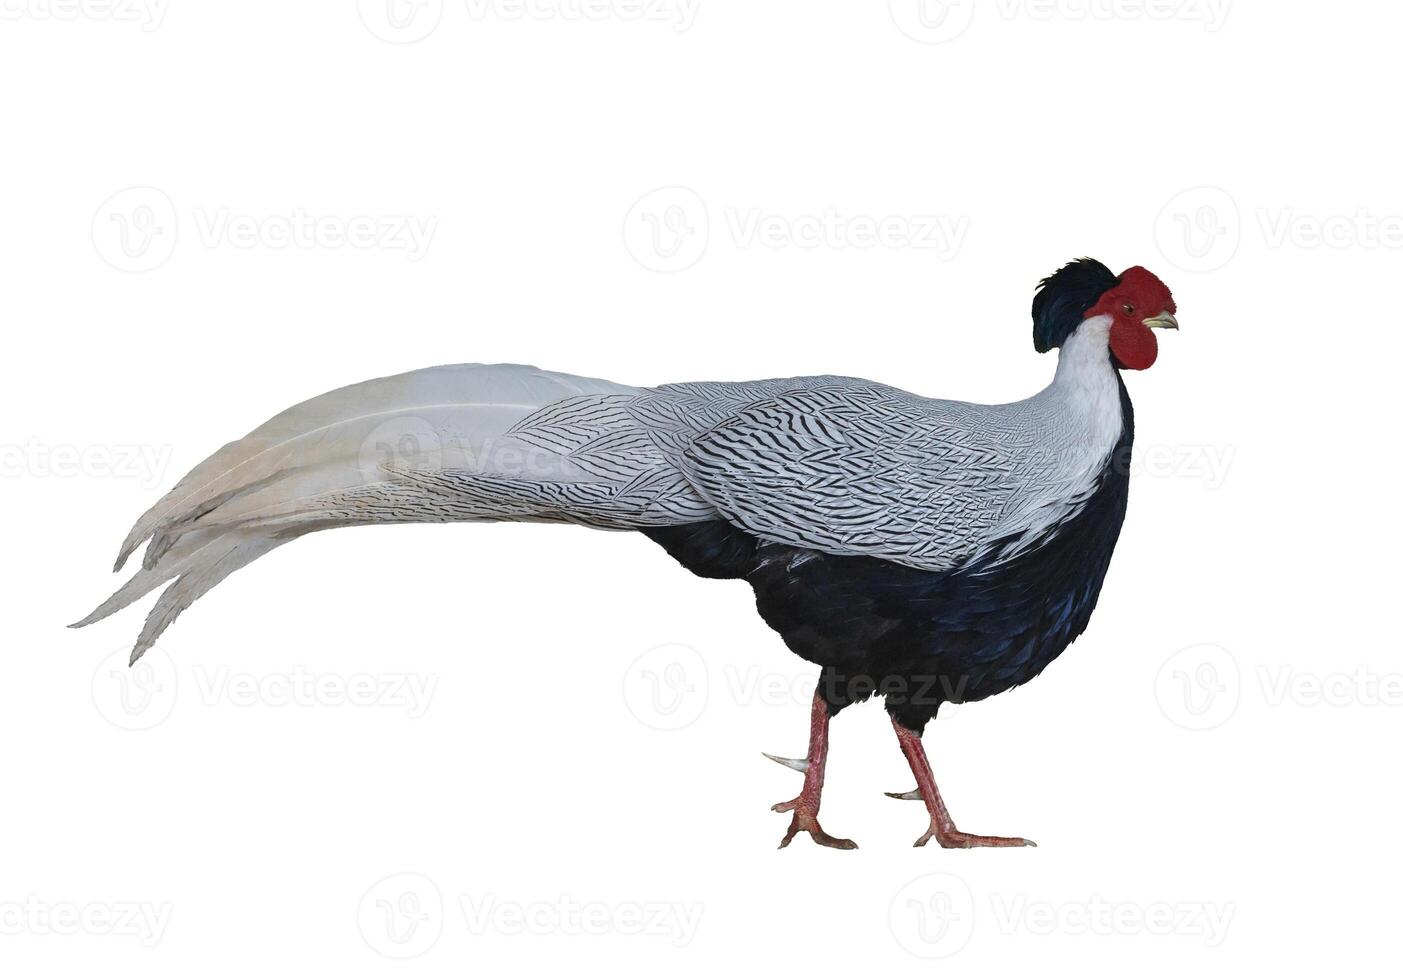 Male silver pheasant or Lophura nycthemera native to Southeast Asia cutout isolated on white background for wildlife conservation concept photo